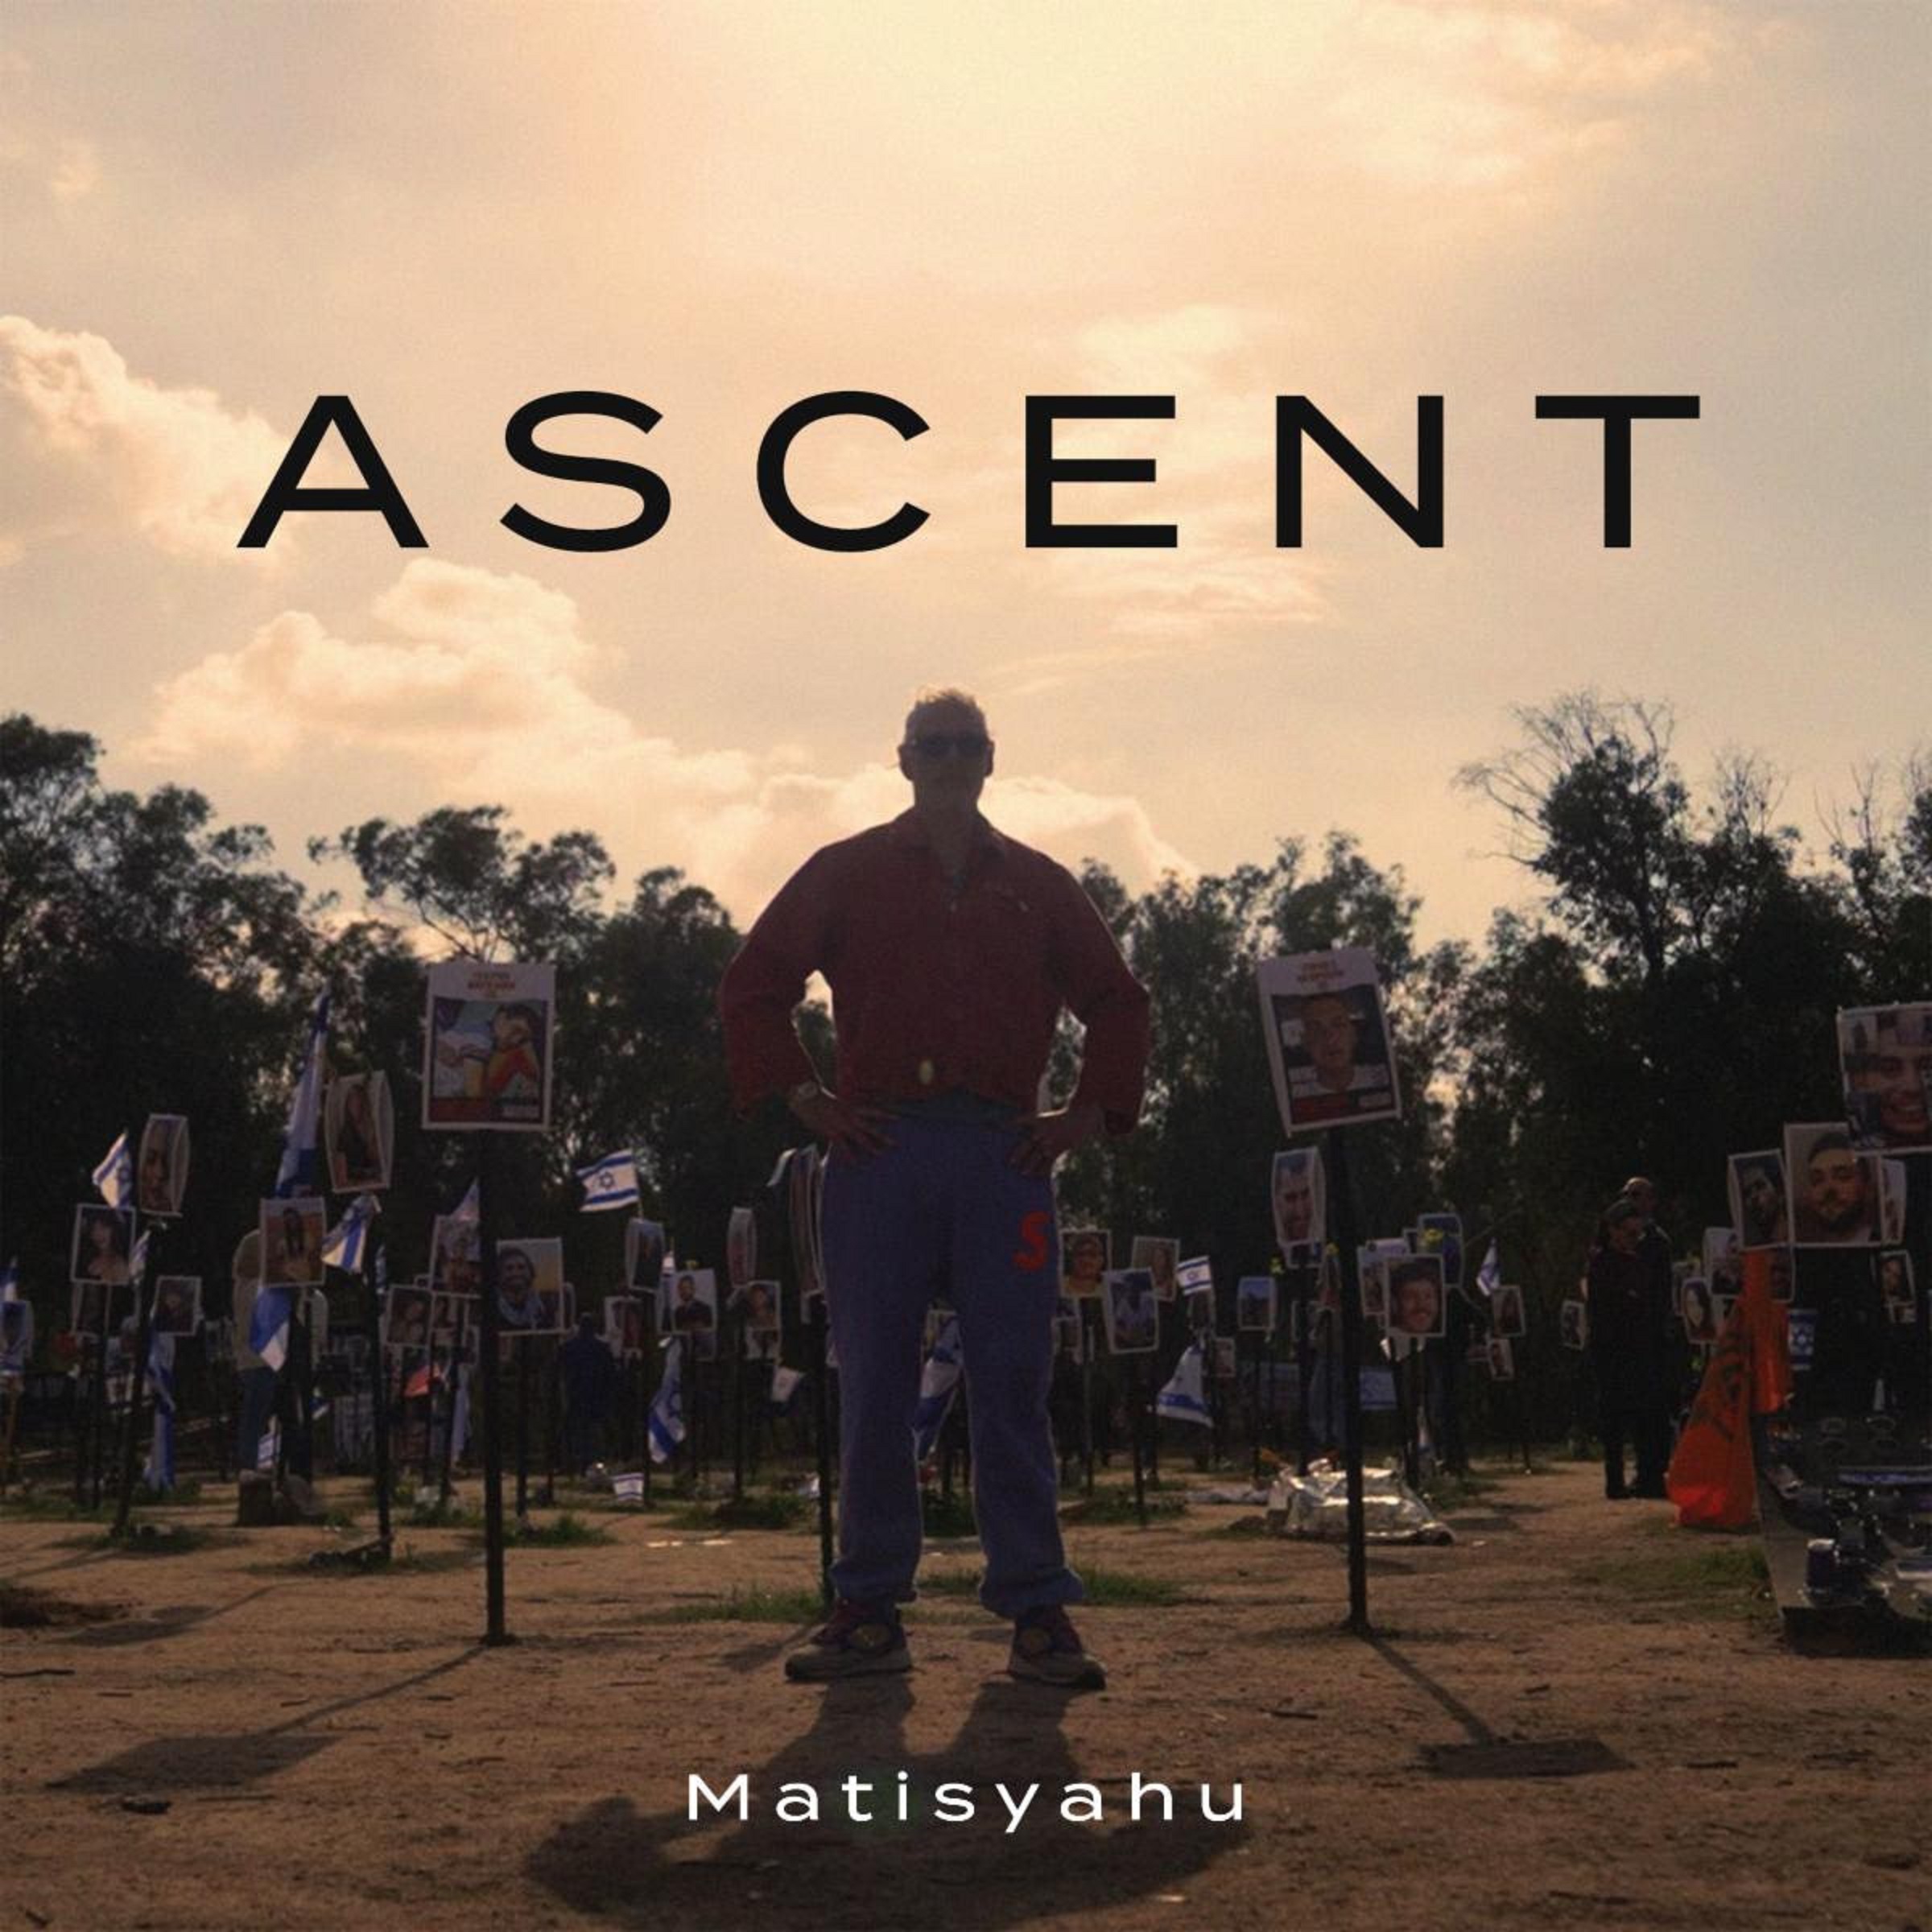 Matisyahu Releases Powerful New Single & Music Video "Ascent"